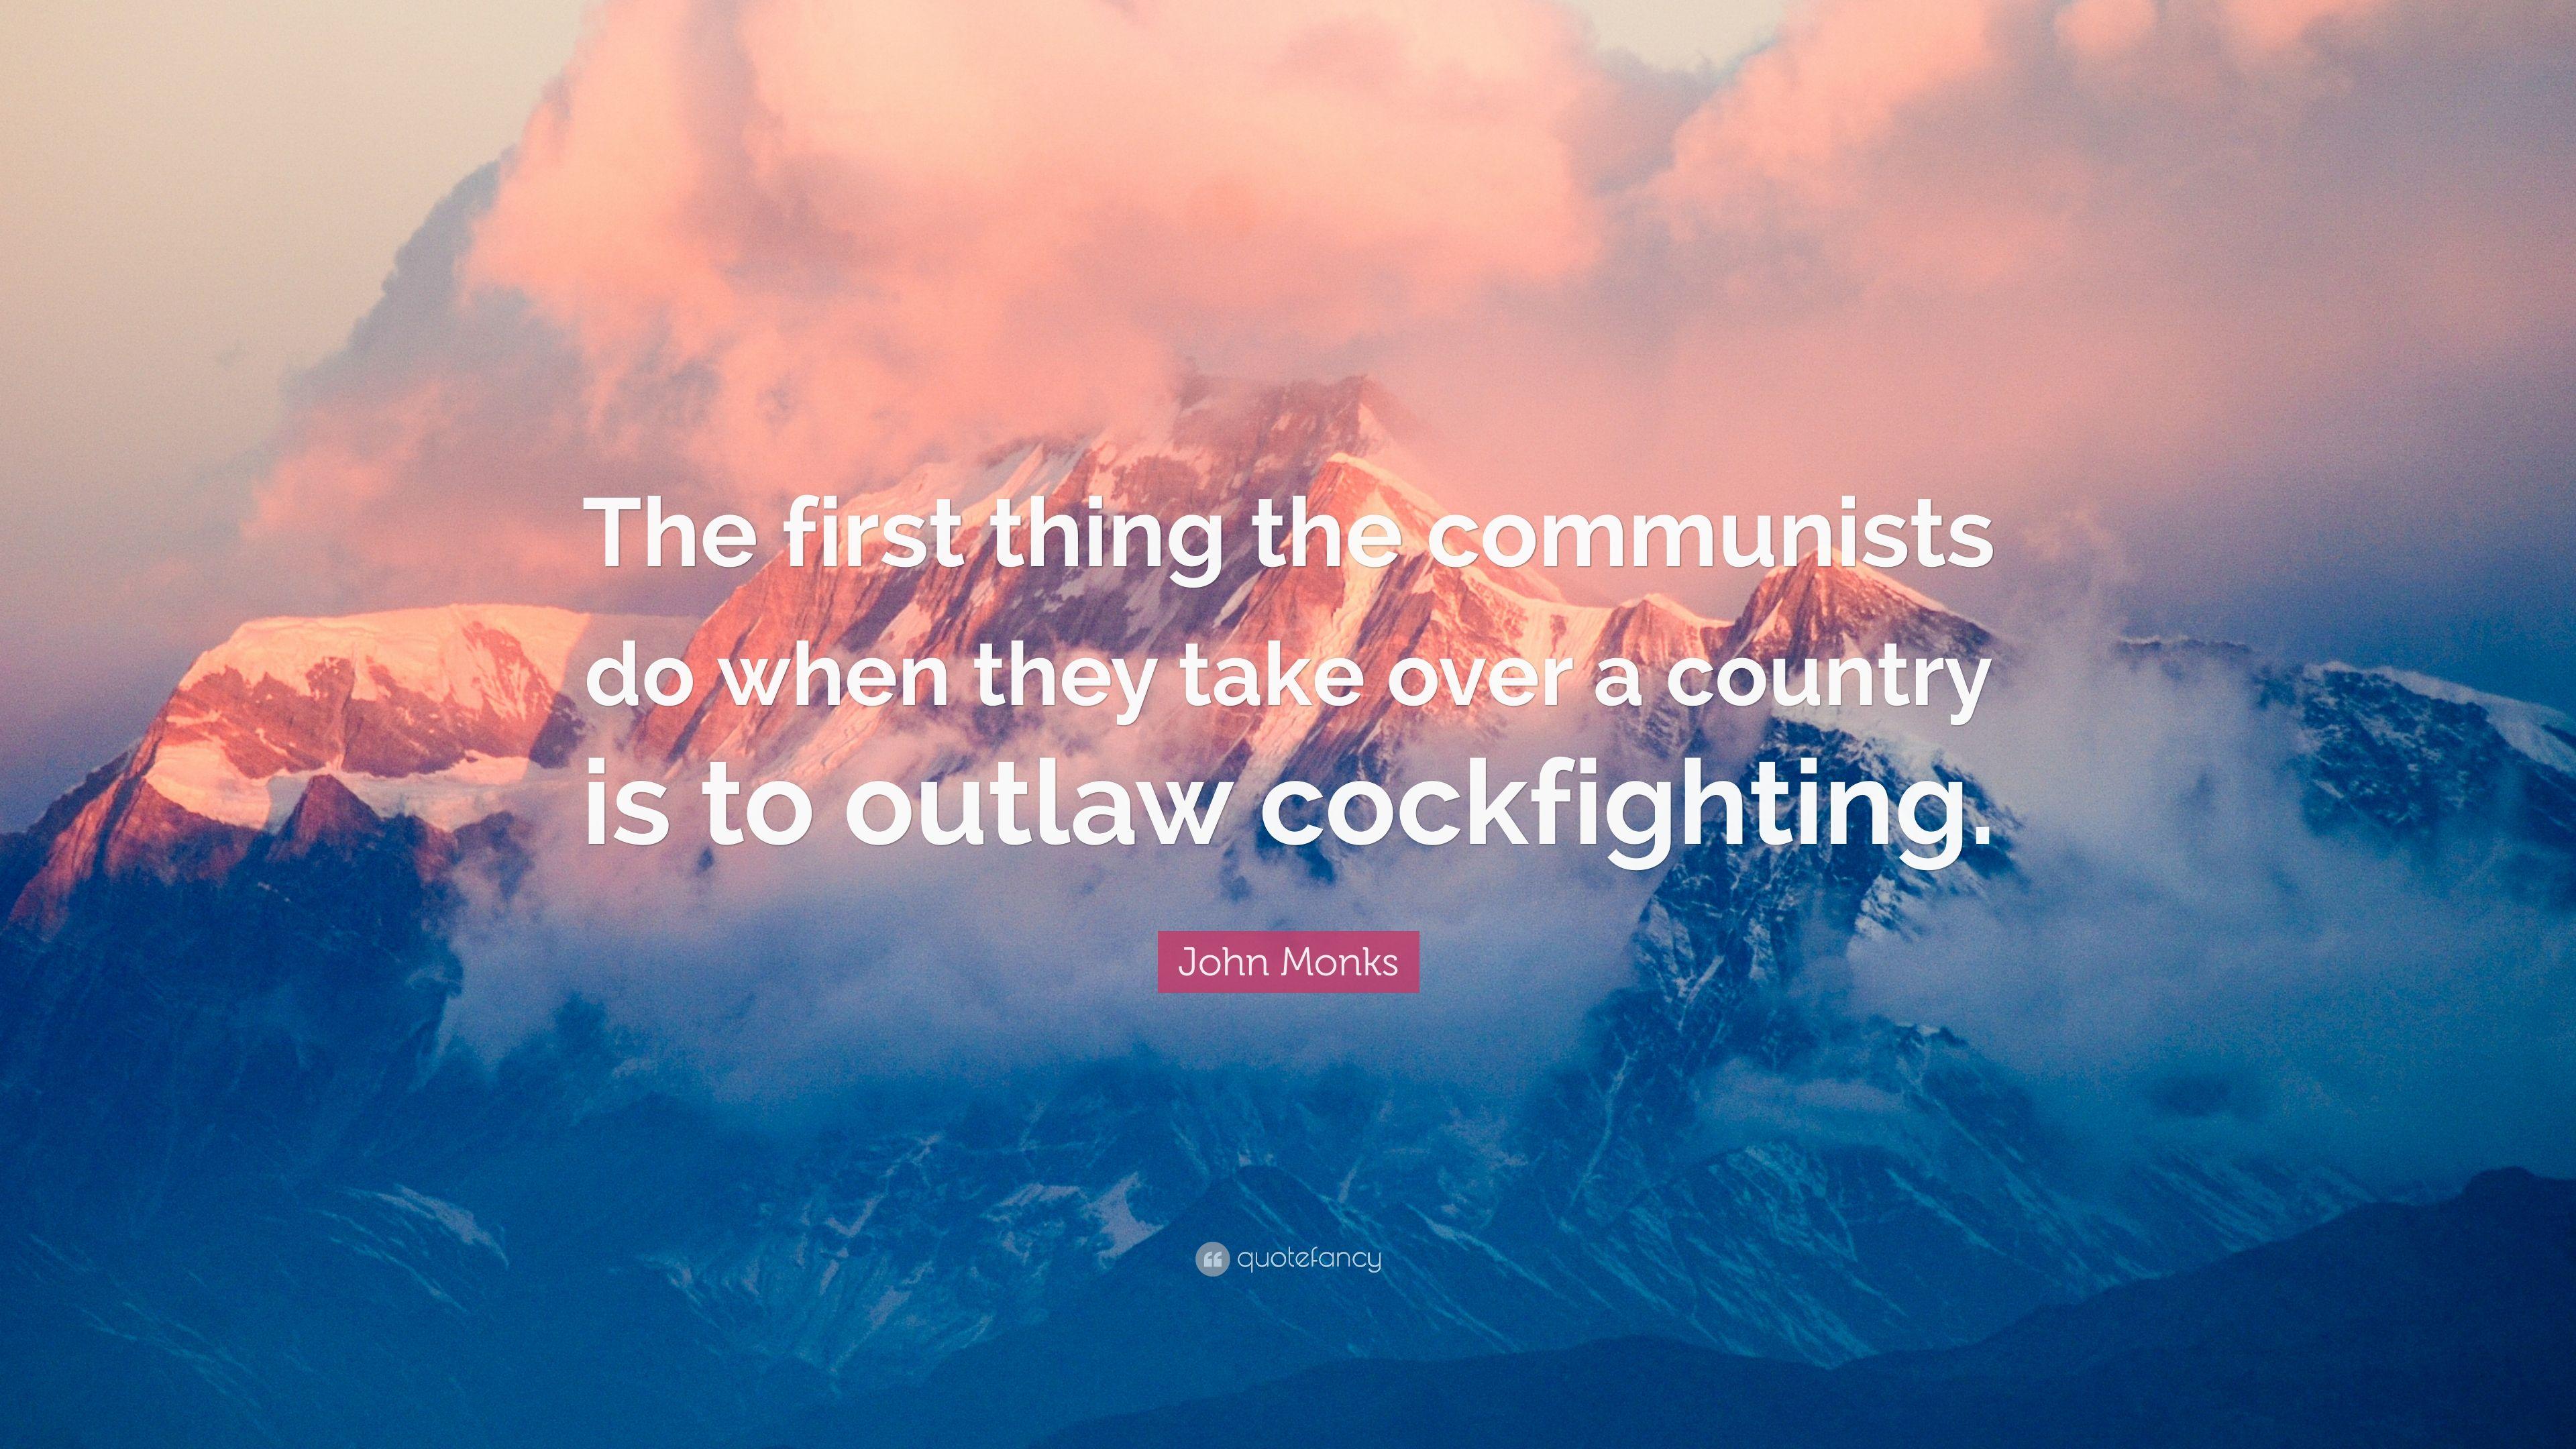 John Monks Quote: “The first thing the communists do when they take